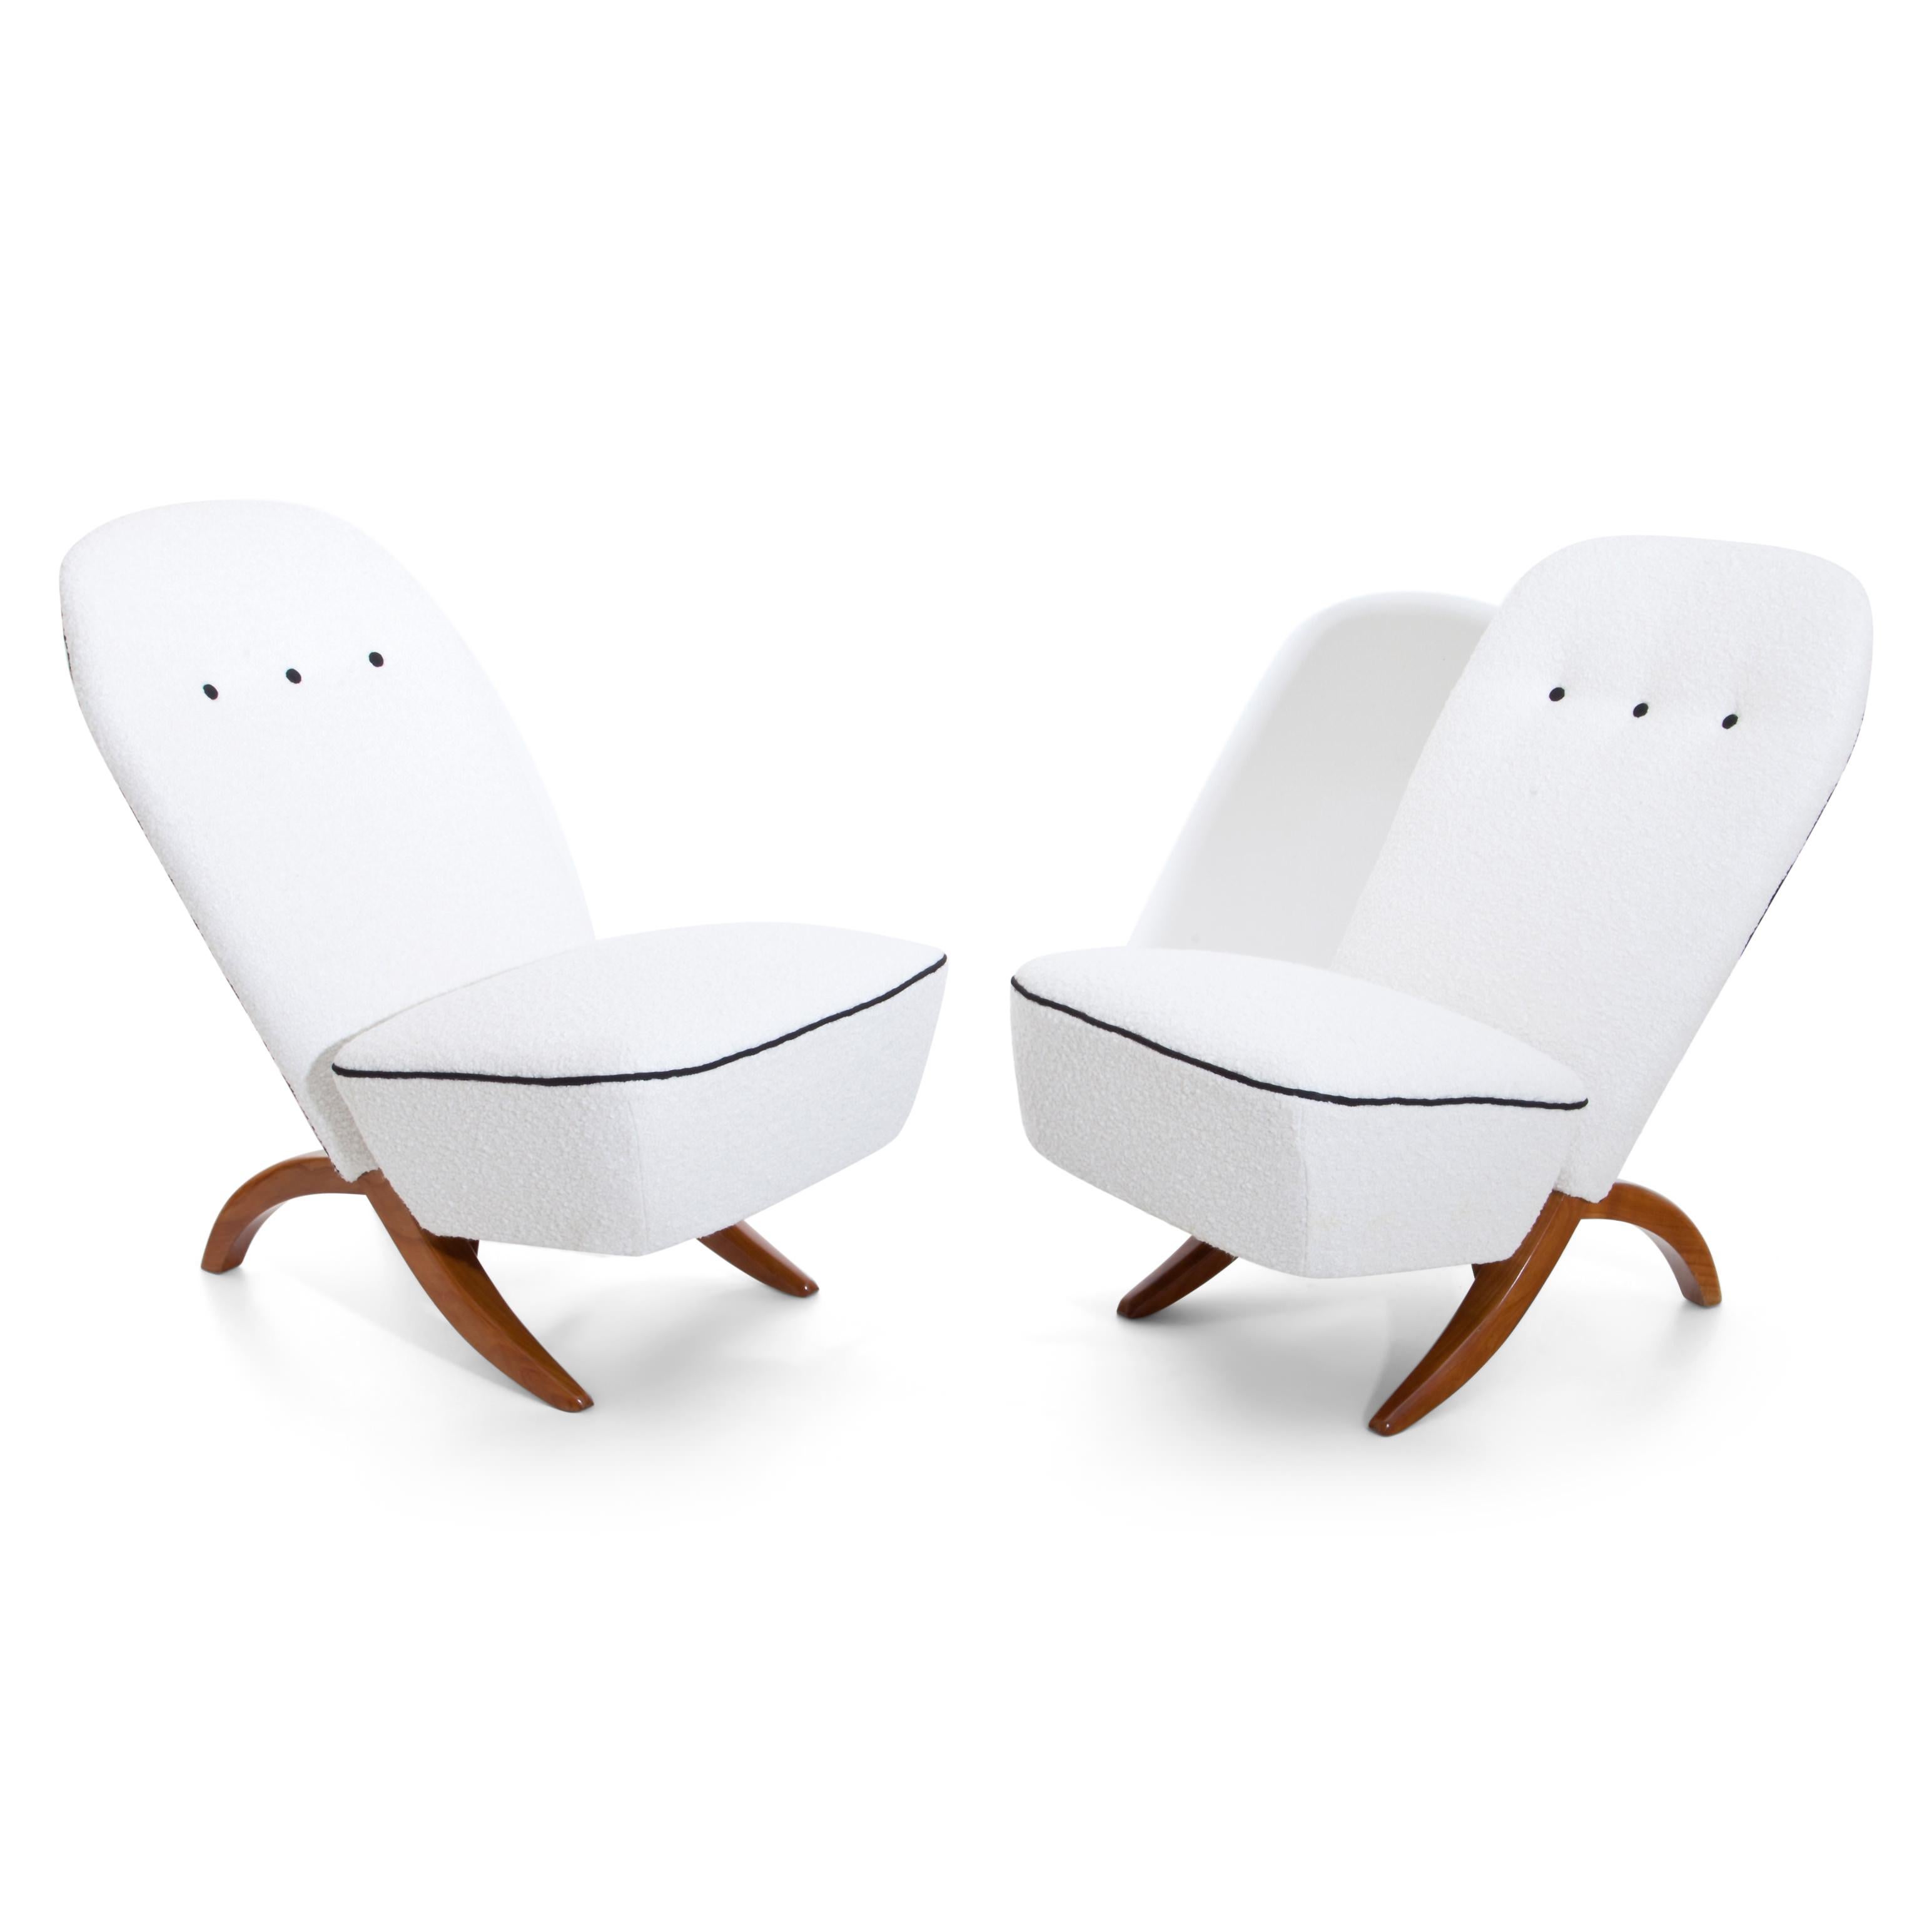 Mid-Century Modern Dux Lounge Chairs, Sweden, Mid-20th Century